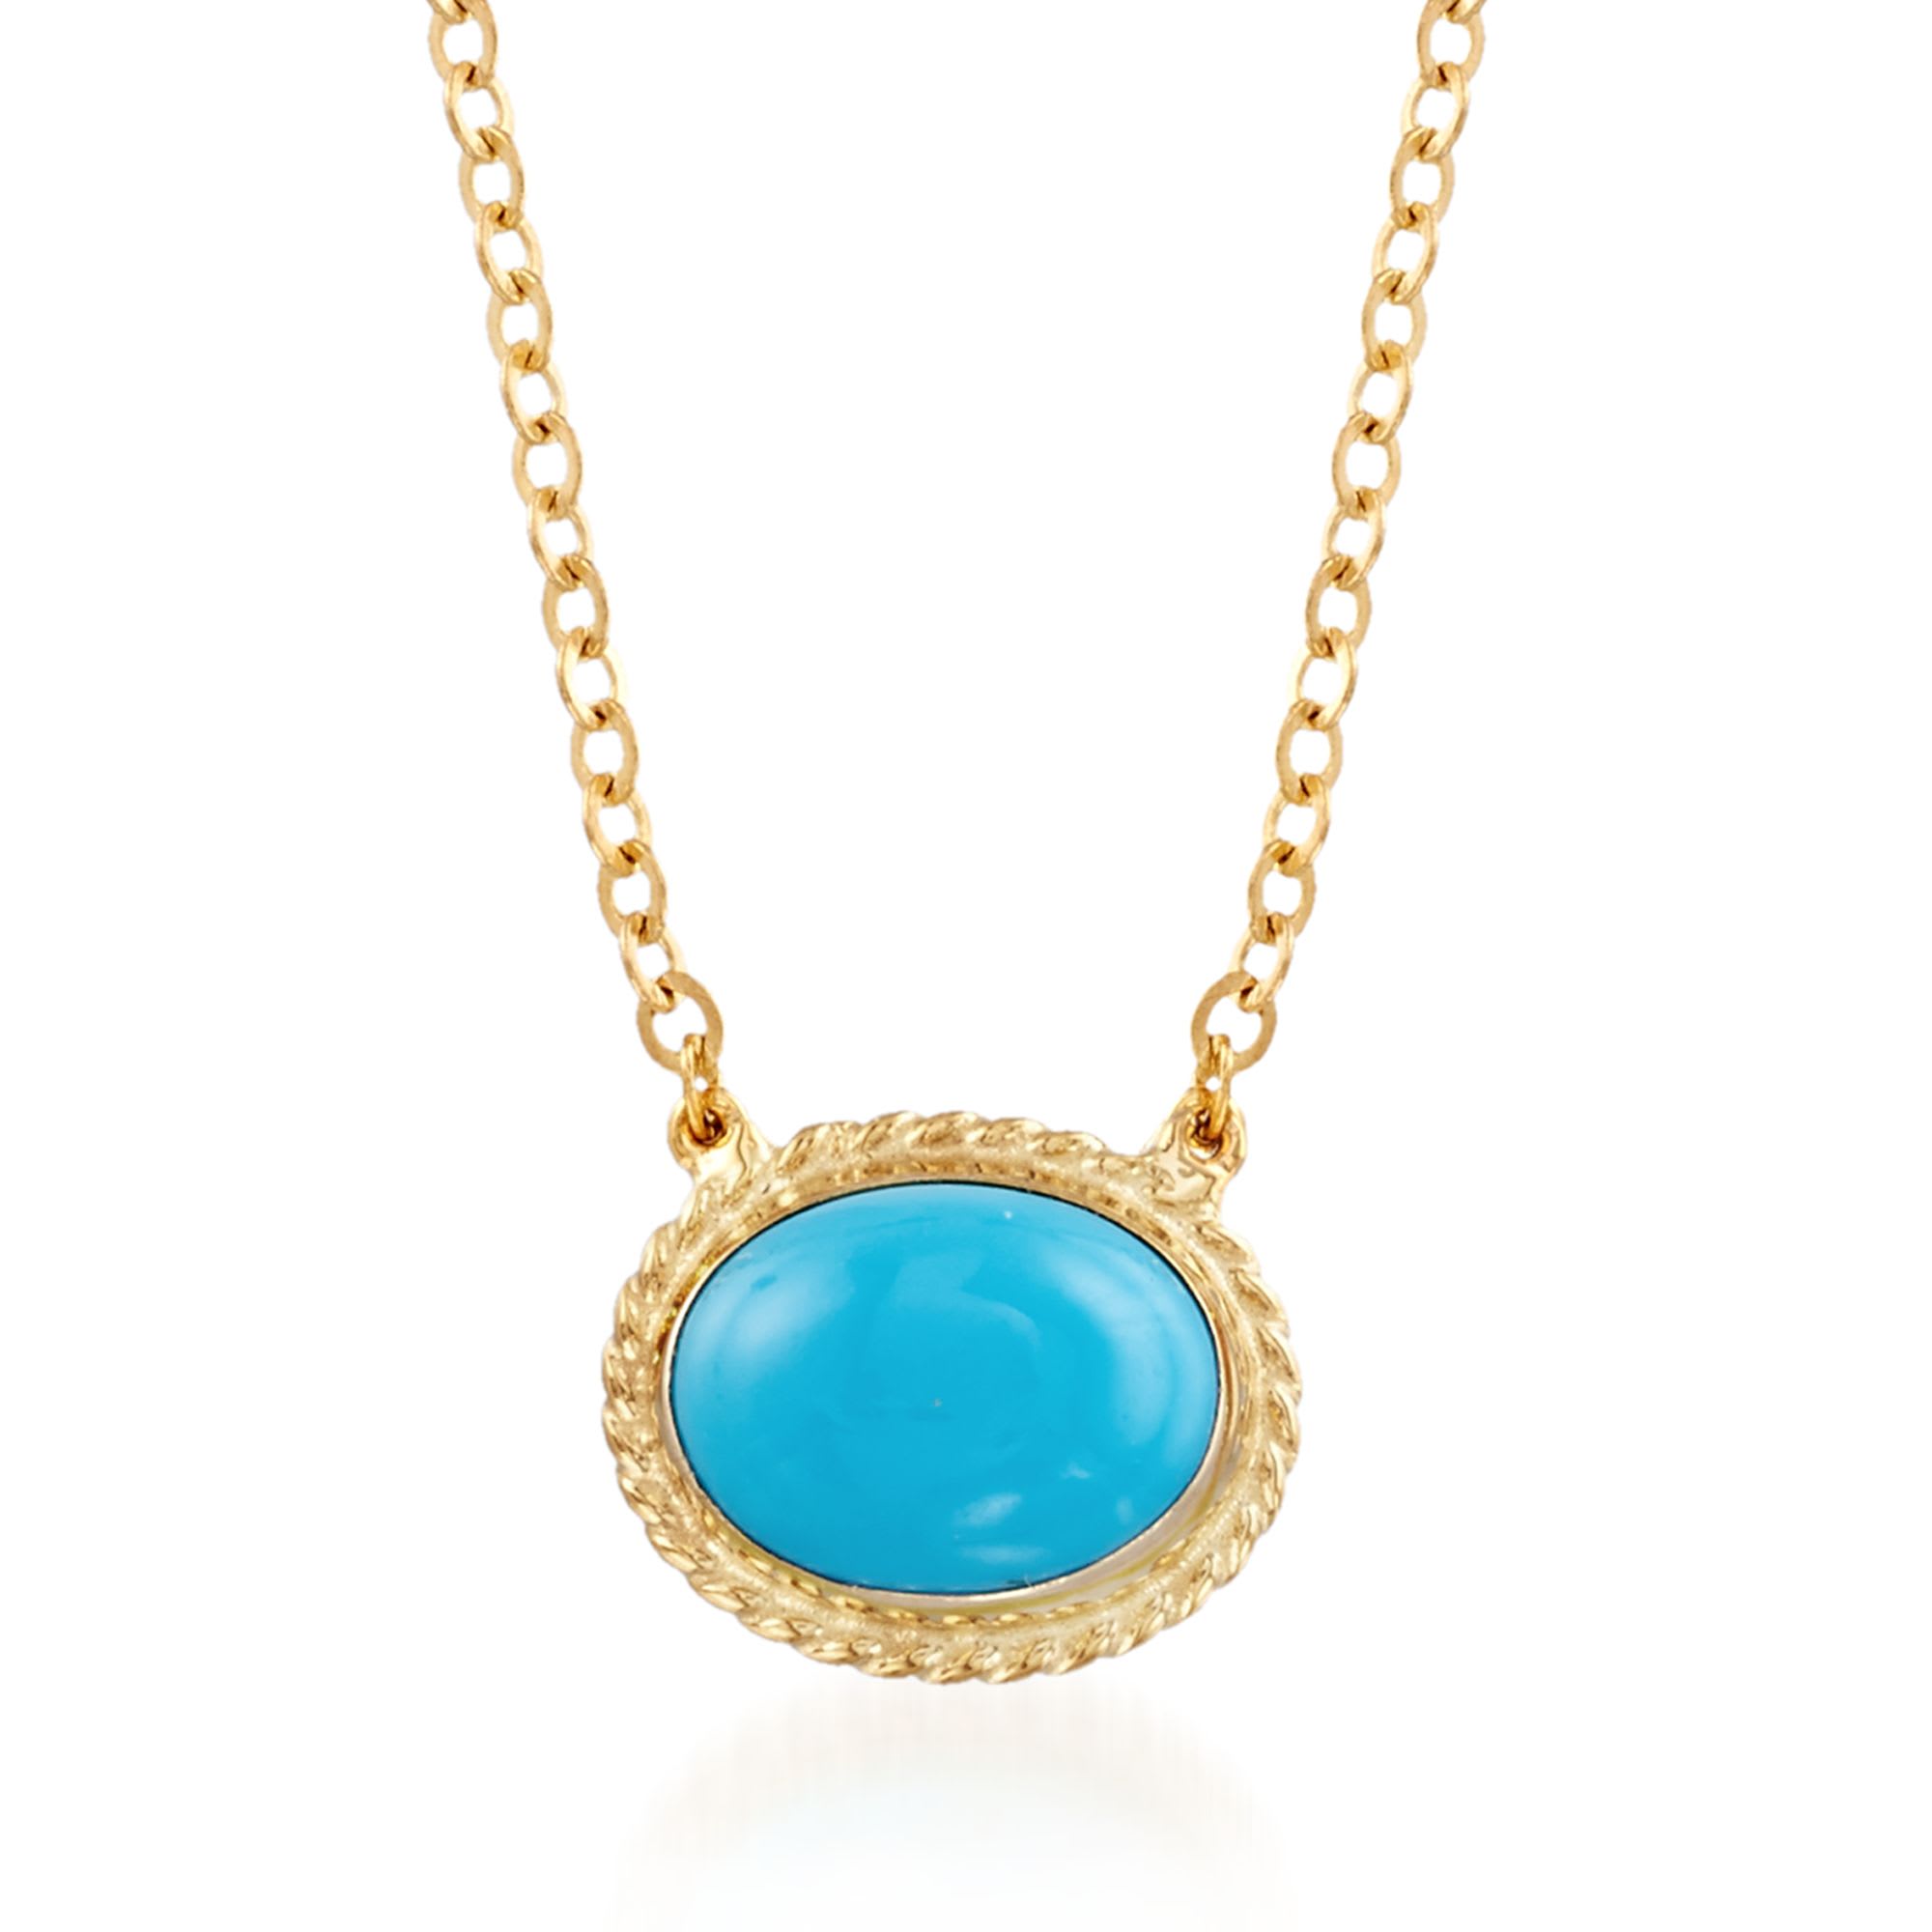 Oval Sleeping Beauty Turquoise Roped Frame Necklace in 14kt Yellow Gold ...